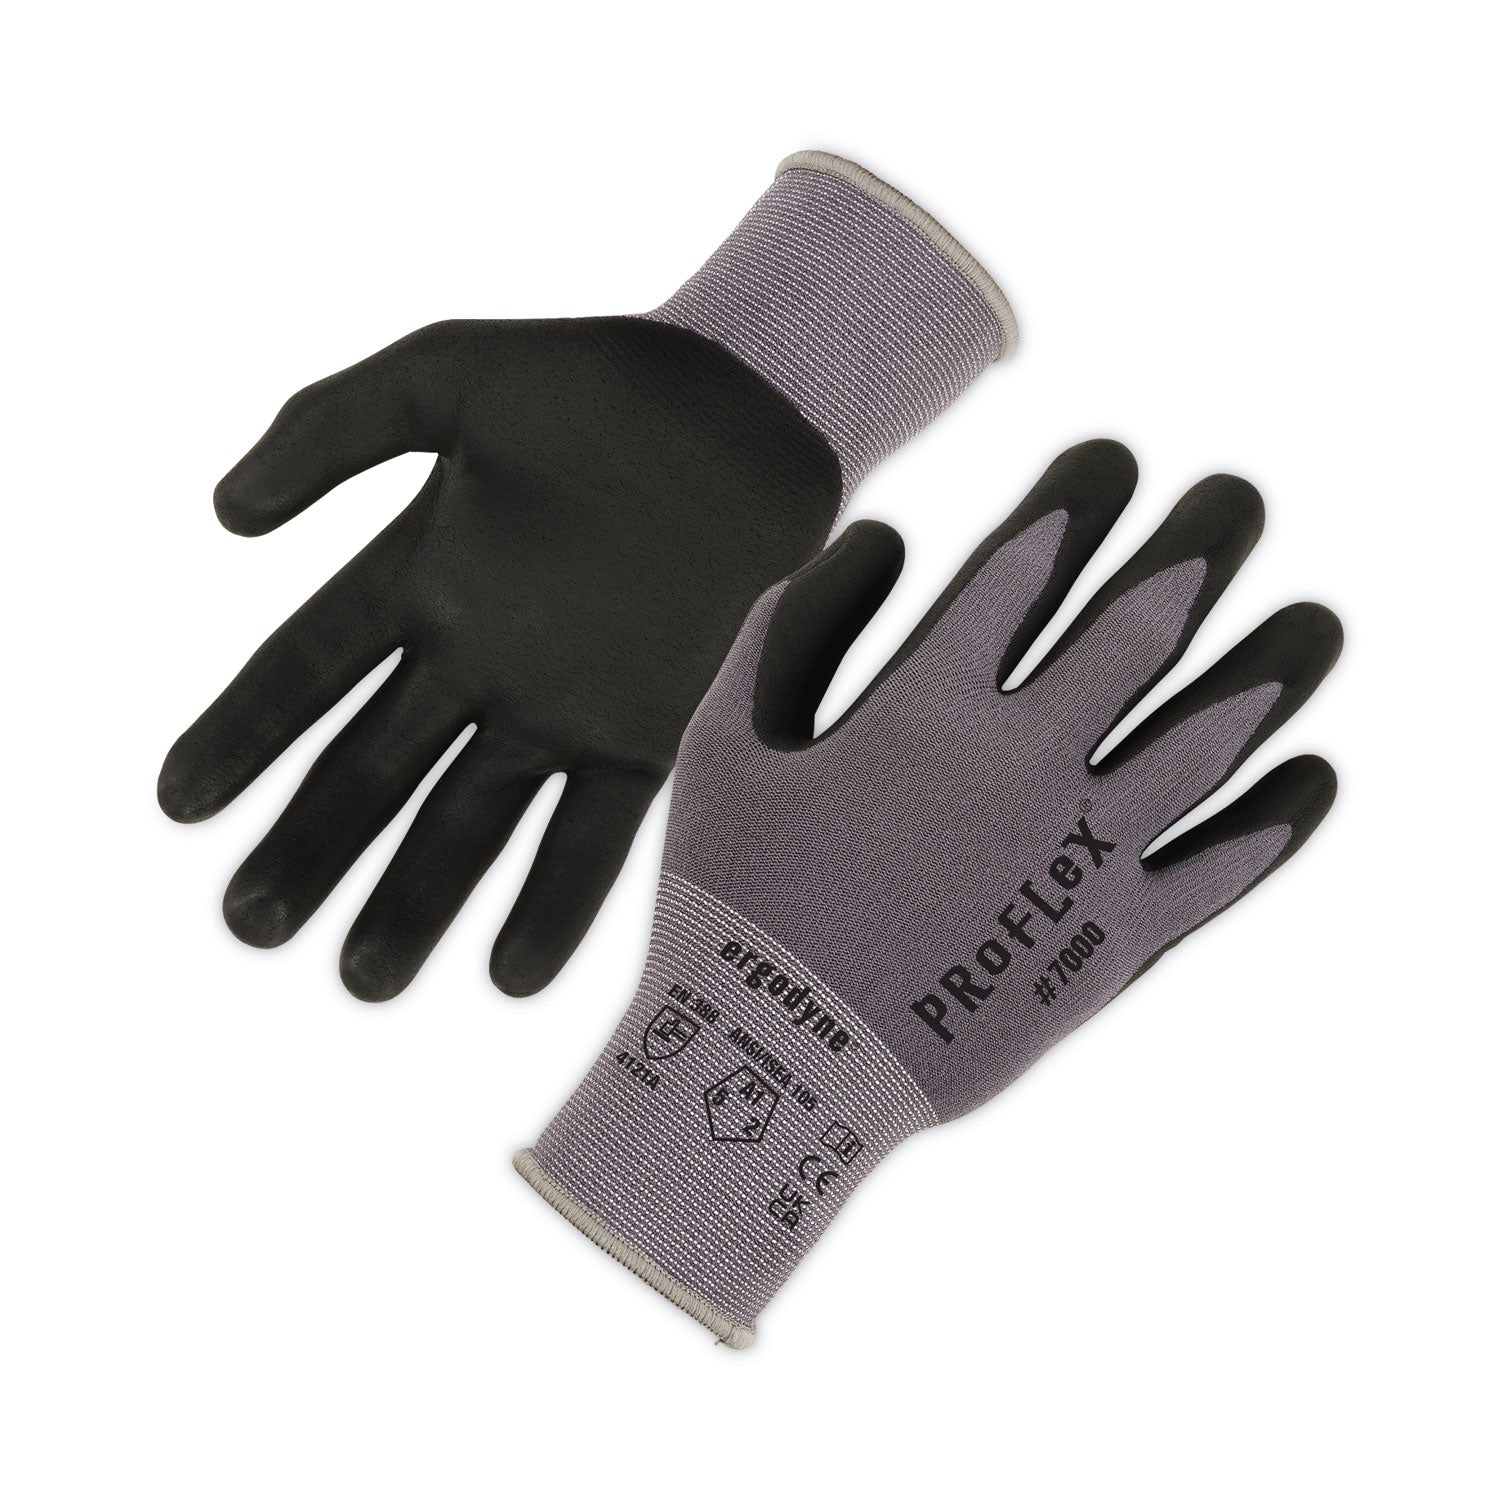 proflex-7000-nitrile-coated-gloves-microfoam-palm-gray-small-12-pairs-pack-ships-in-1-3-business-days_ego10362 - 1